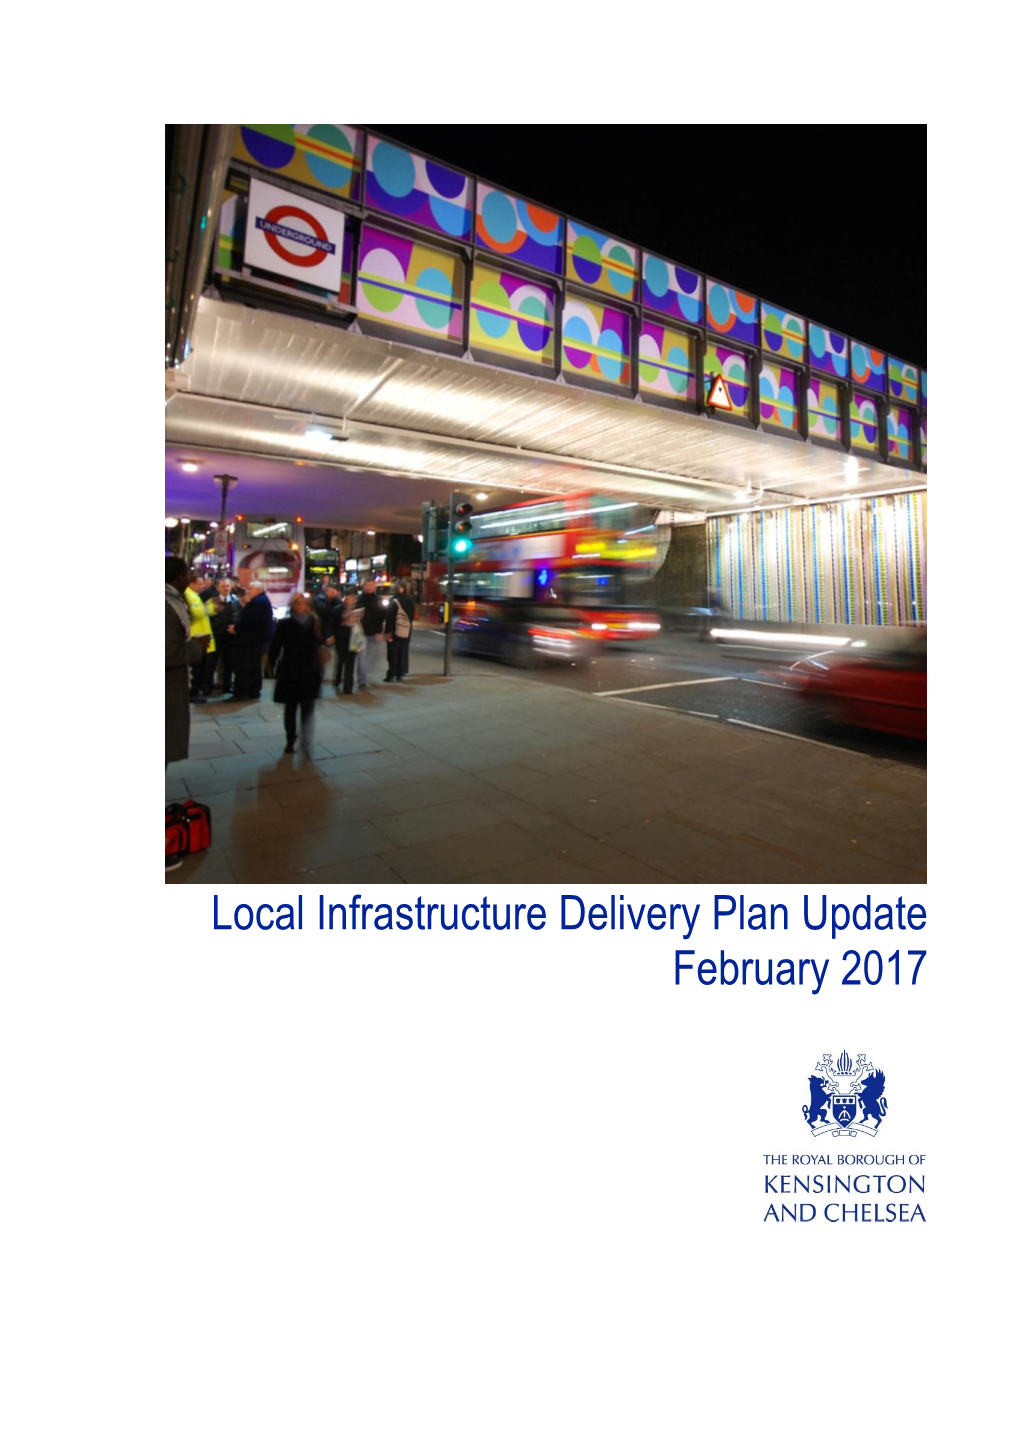 Local Infrastructure Delivery Plan (IDP) Update (February 2017)